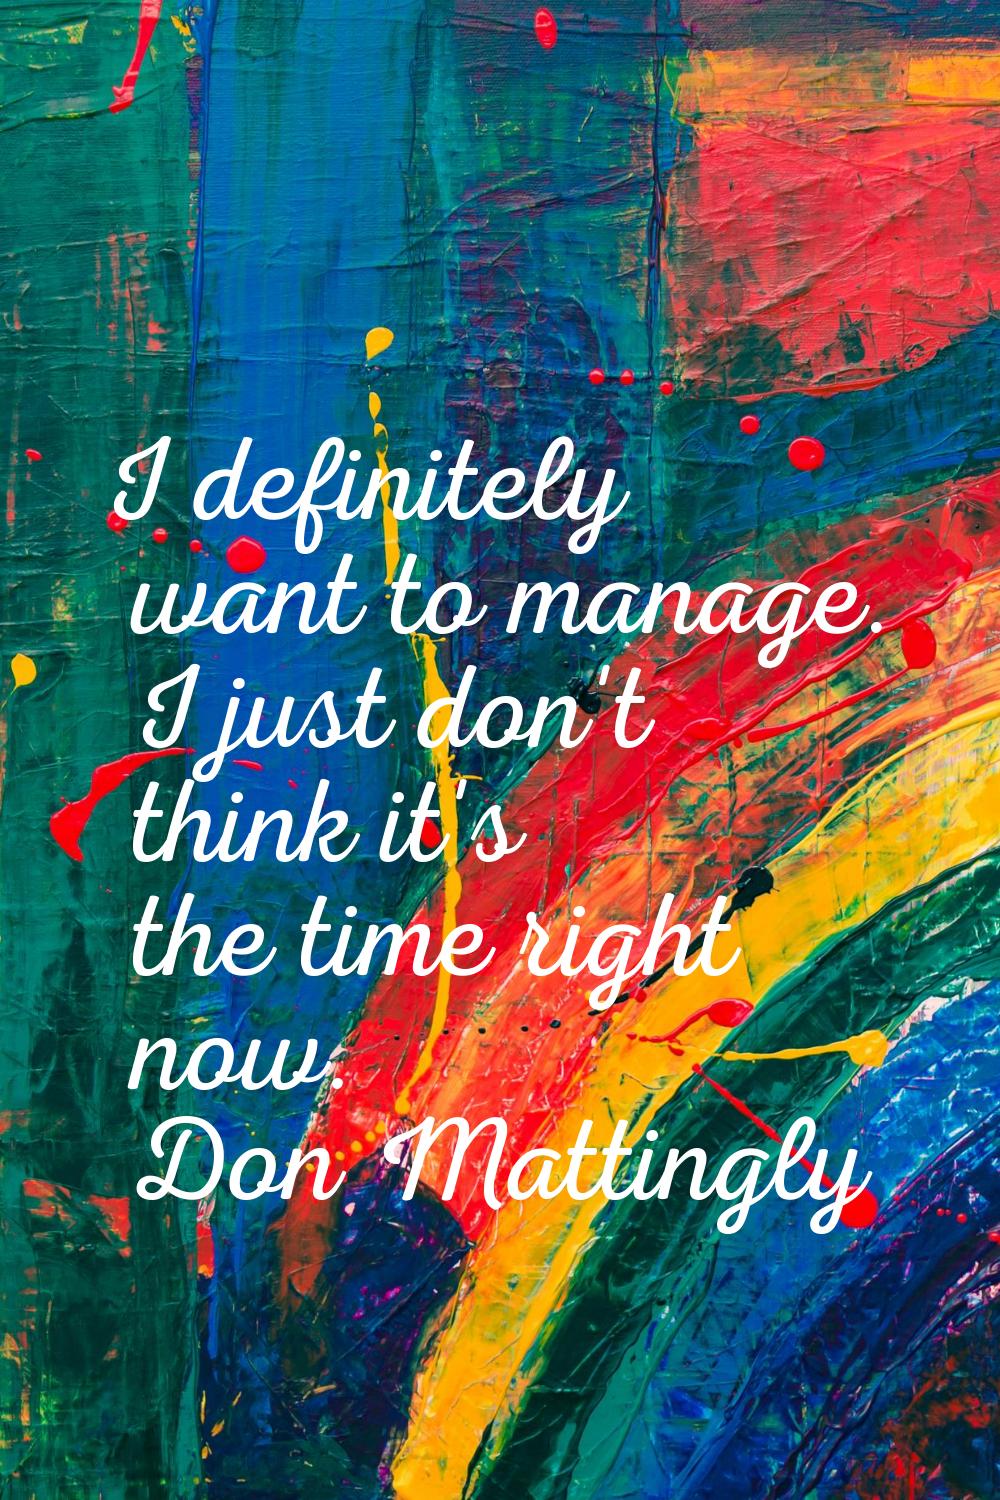 I definitely want to manage. I just don't think it's the time right now.